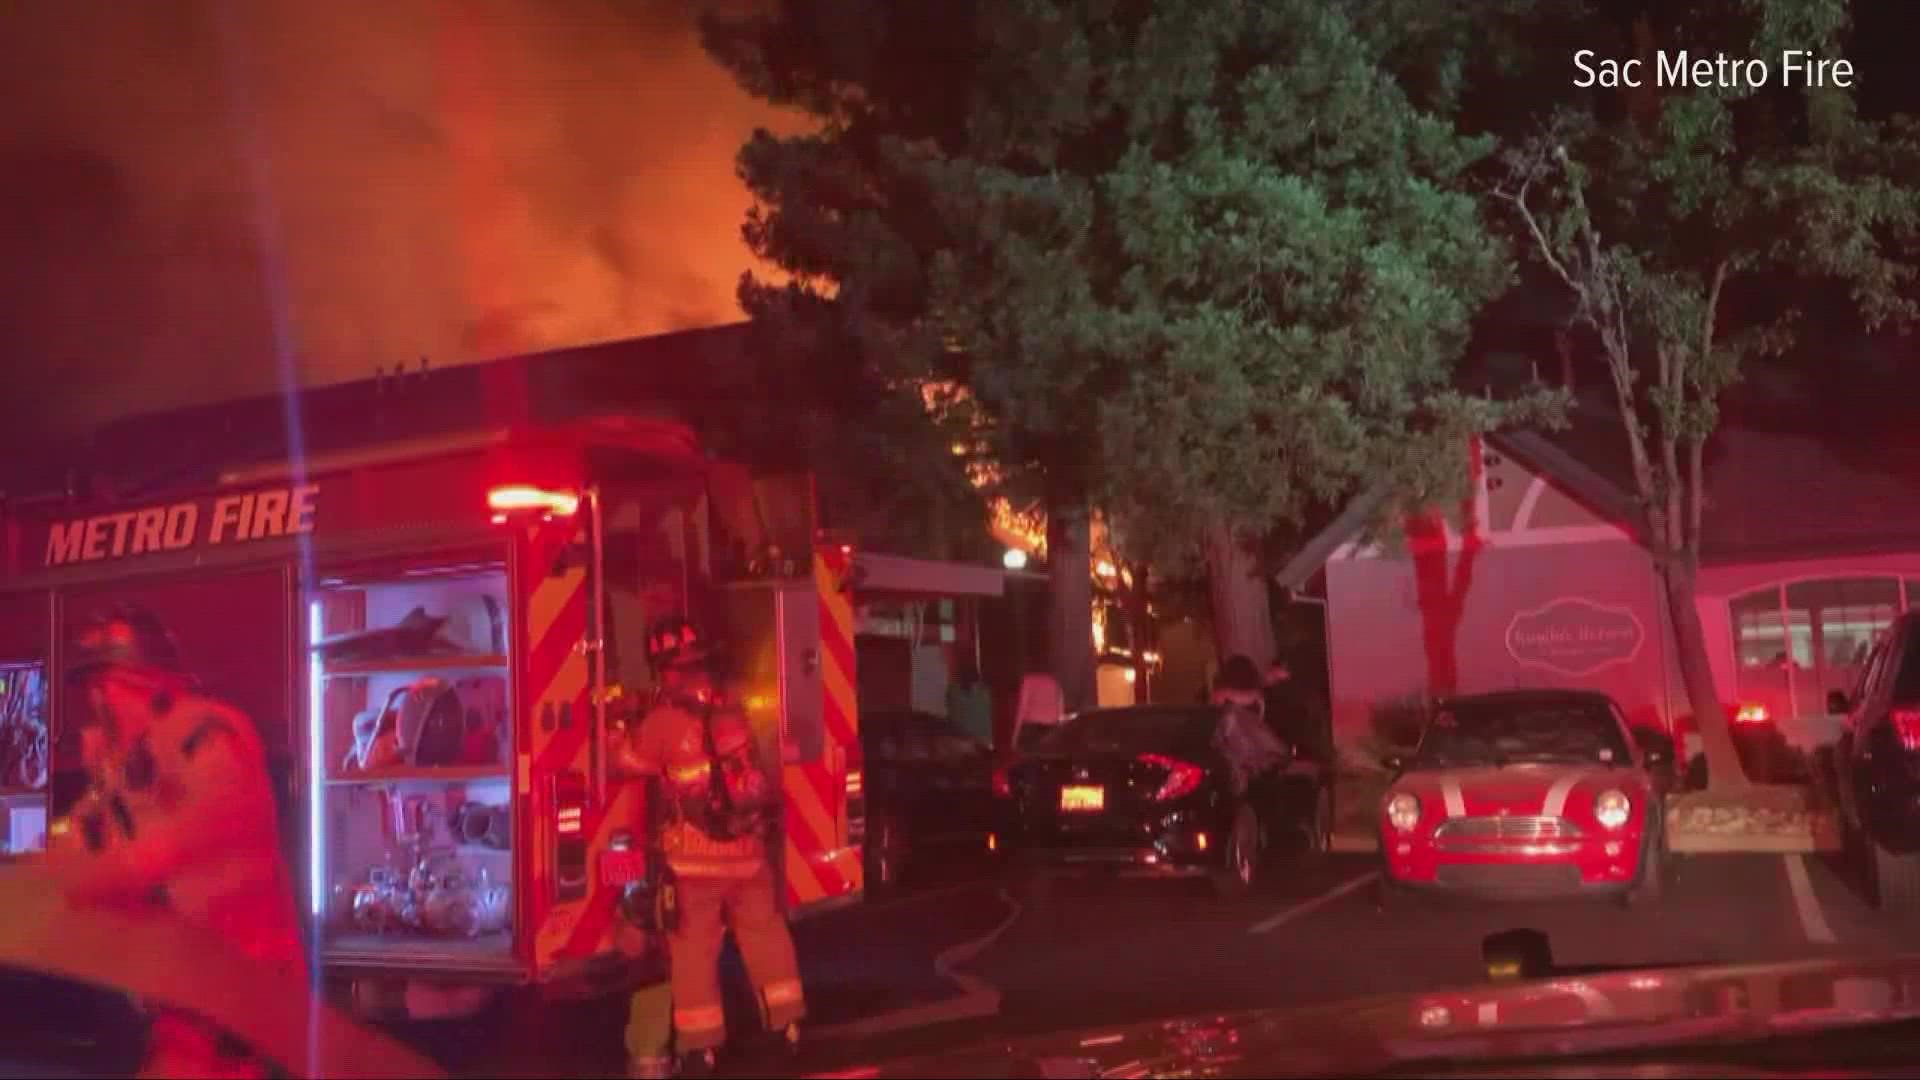 Sacramento Metropolitan Fire officials are investigating the cause of the fire. One person had to be treated for smoke inhalation.